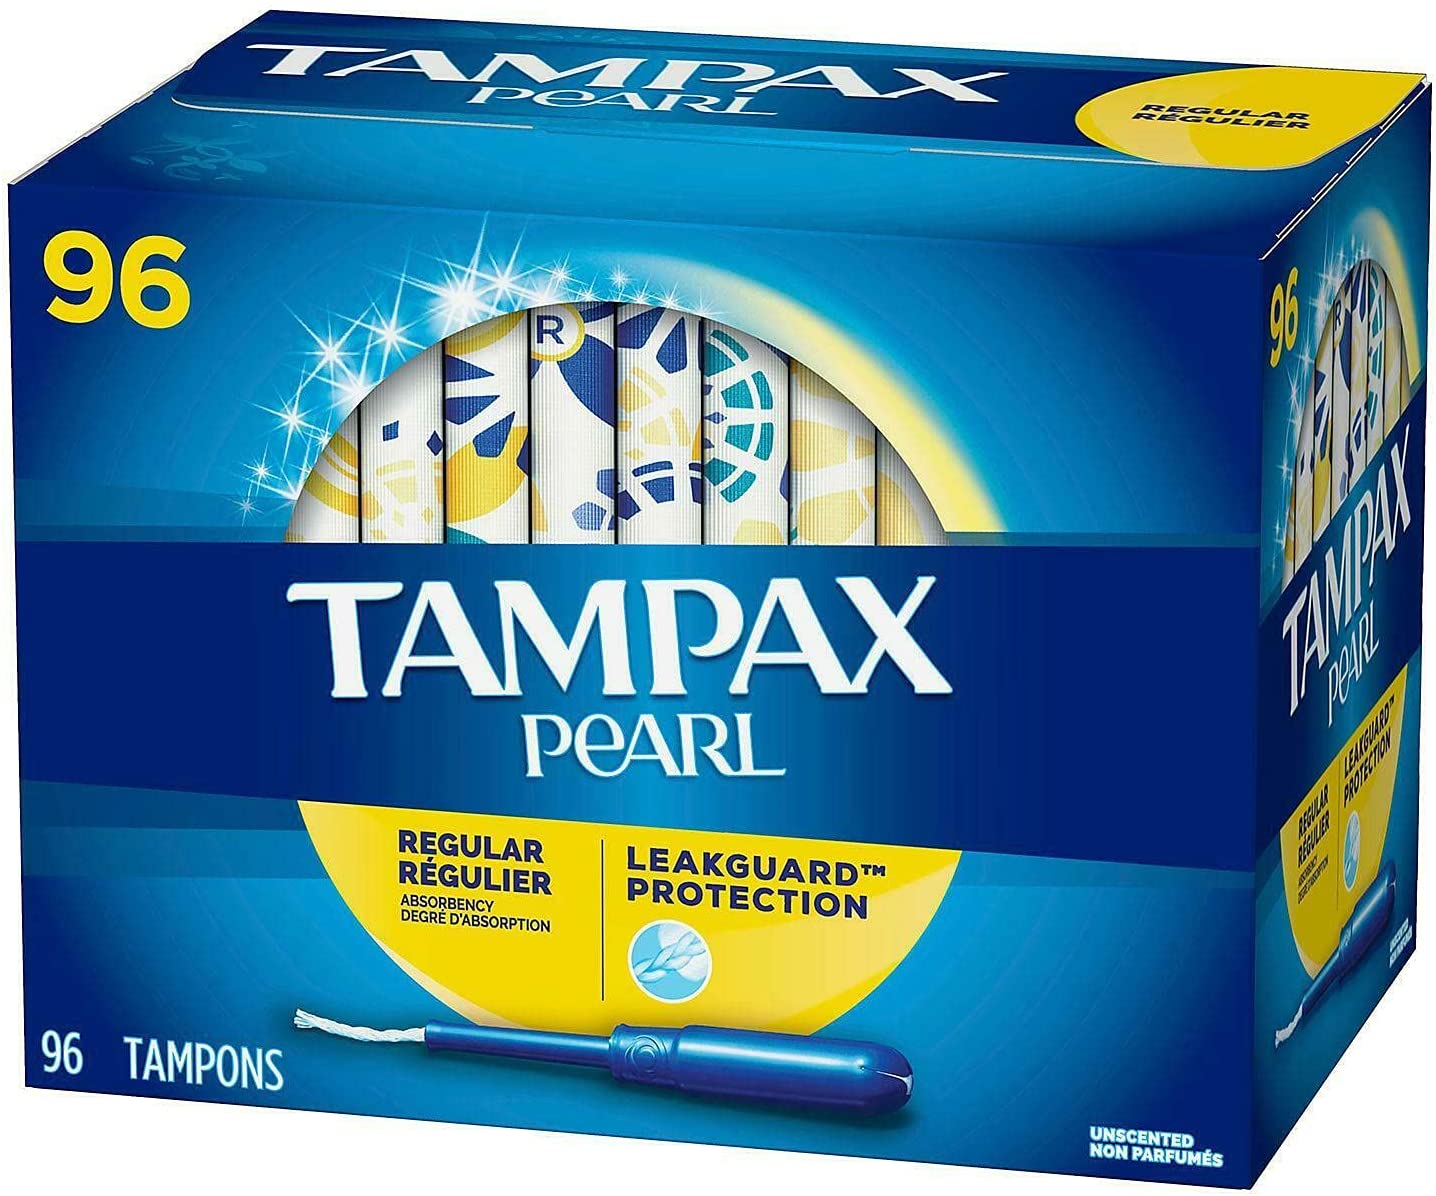 TAMPAX PEARL TAMPONS REGULAR, UNSCENTED Packed 96 